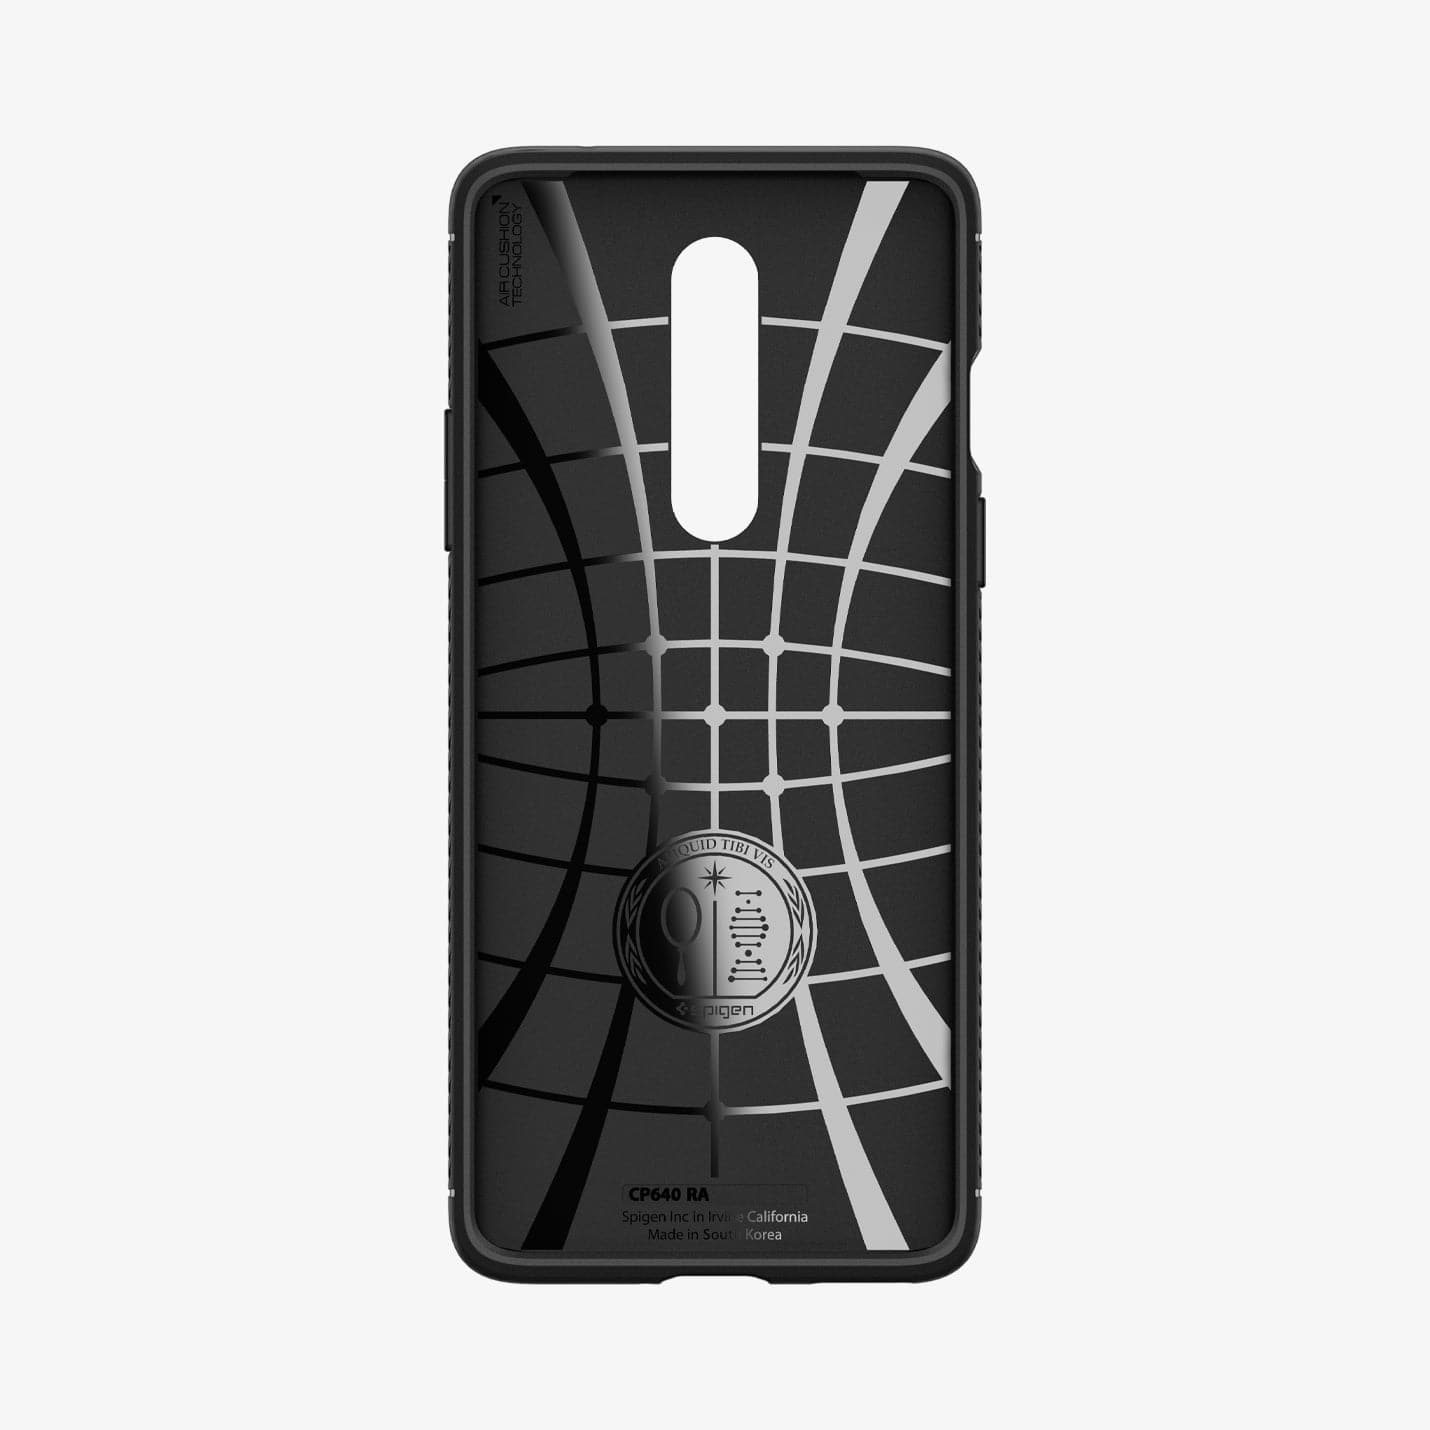 ACS00826 - OnePlus 8 Rugged Armor Case in Matte Black showing the inner case with spider web pattern